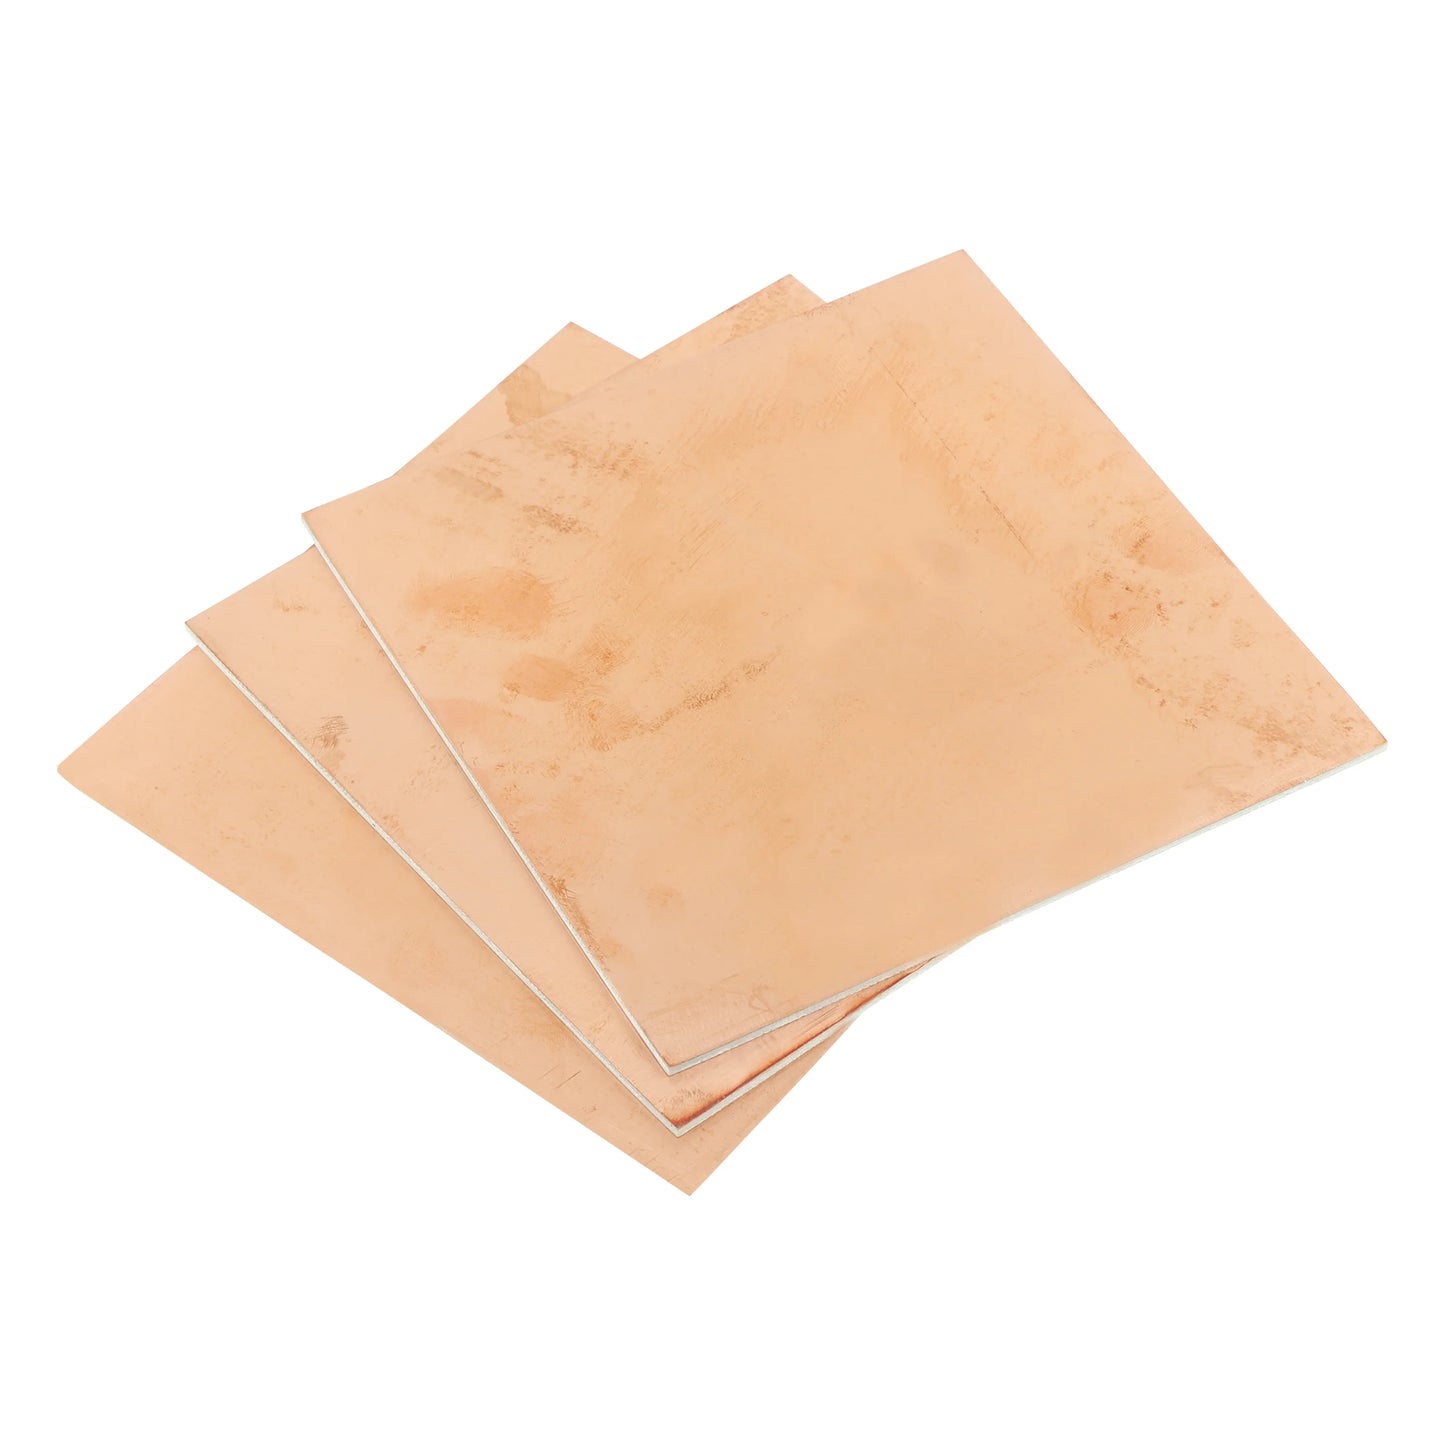 0.4 mm Thin DOUBLE Side Copper Clad Laminate Circuit Board 6 X 6 Inch (FR4 Glass Epoxy PCB) - 3 Units